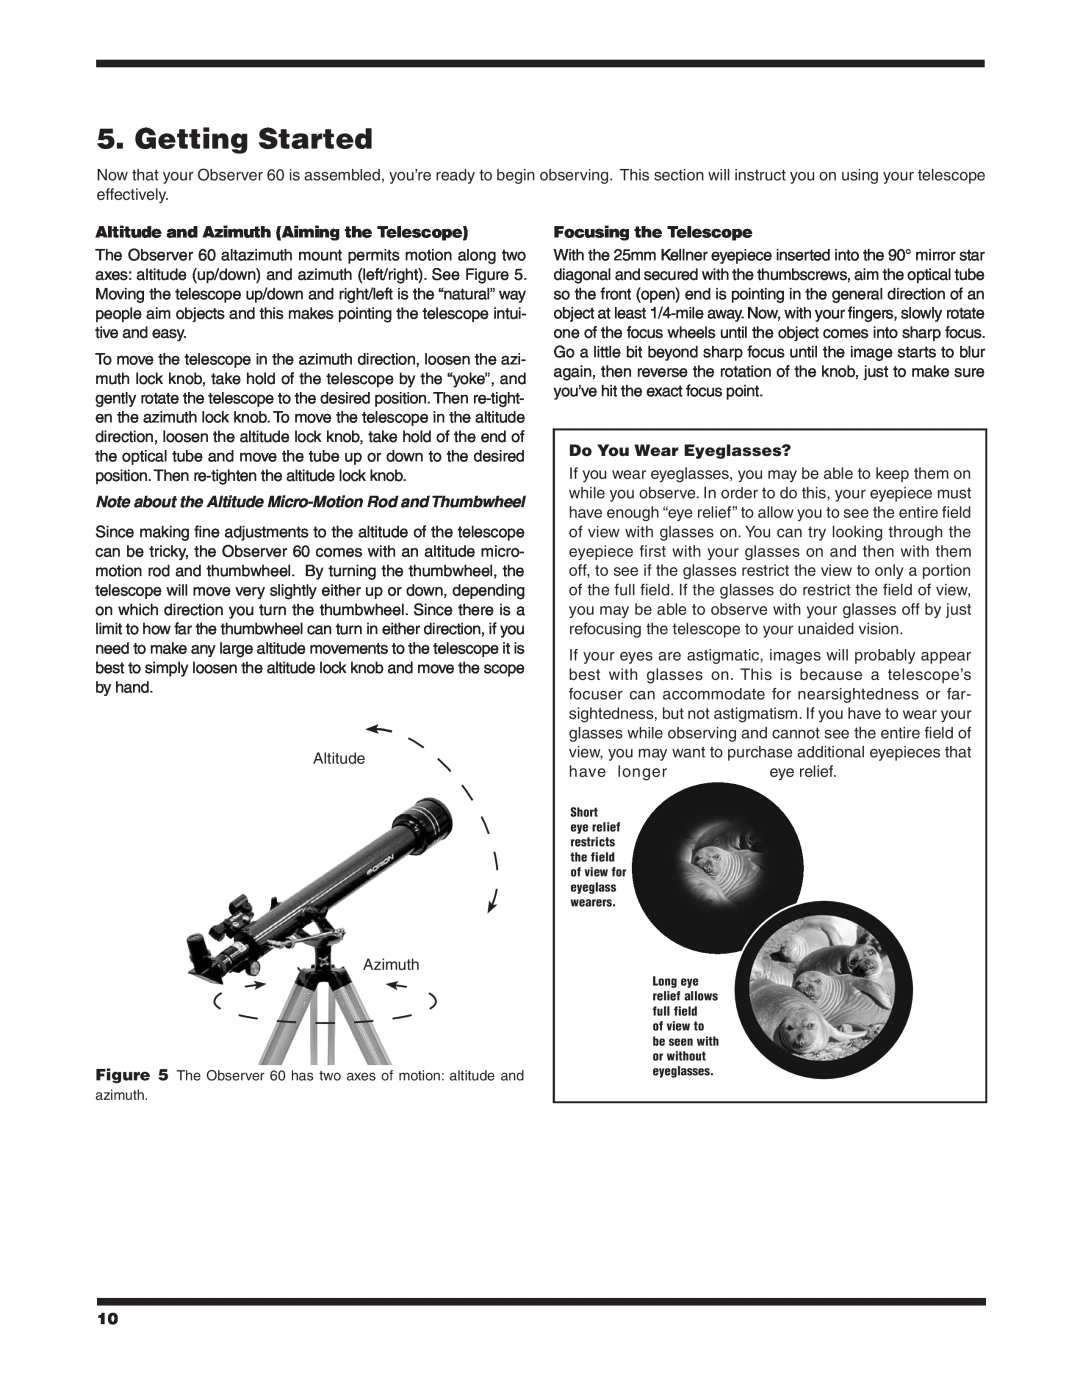 Orion 9854 Getting Started, Altitude and Azimuth Aiming the Telescope, Focusing the Telescope, Do You Wear Eyeglasses? 